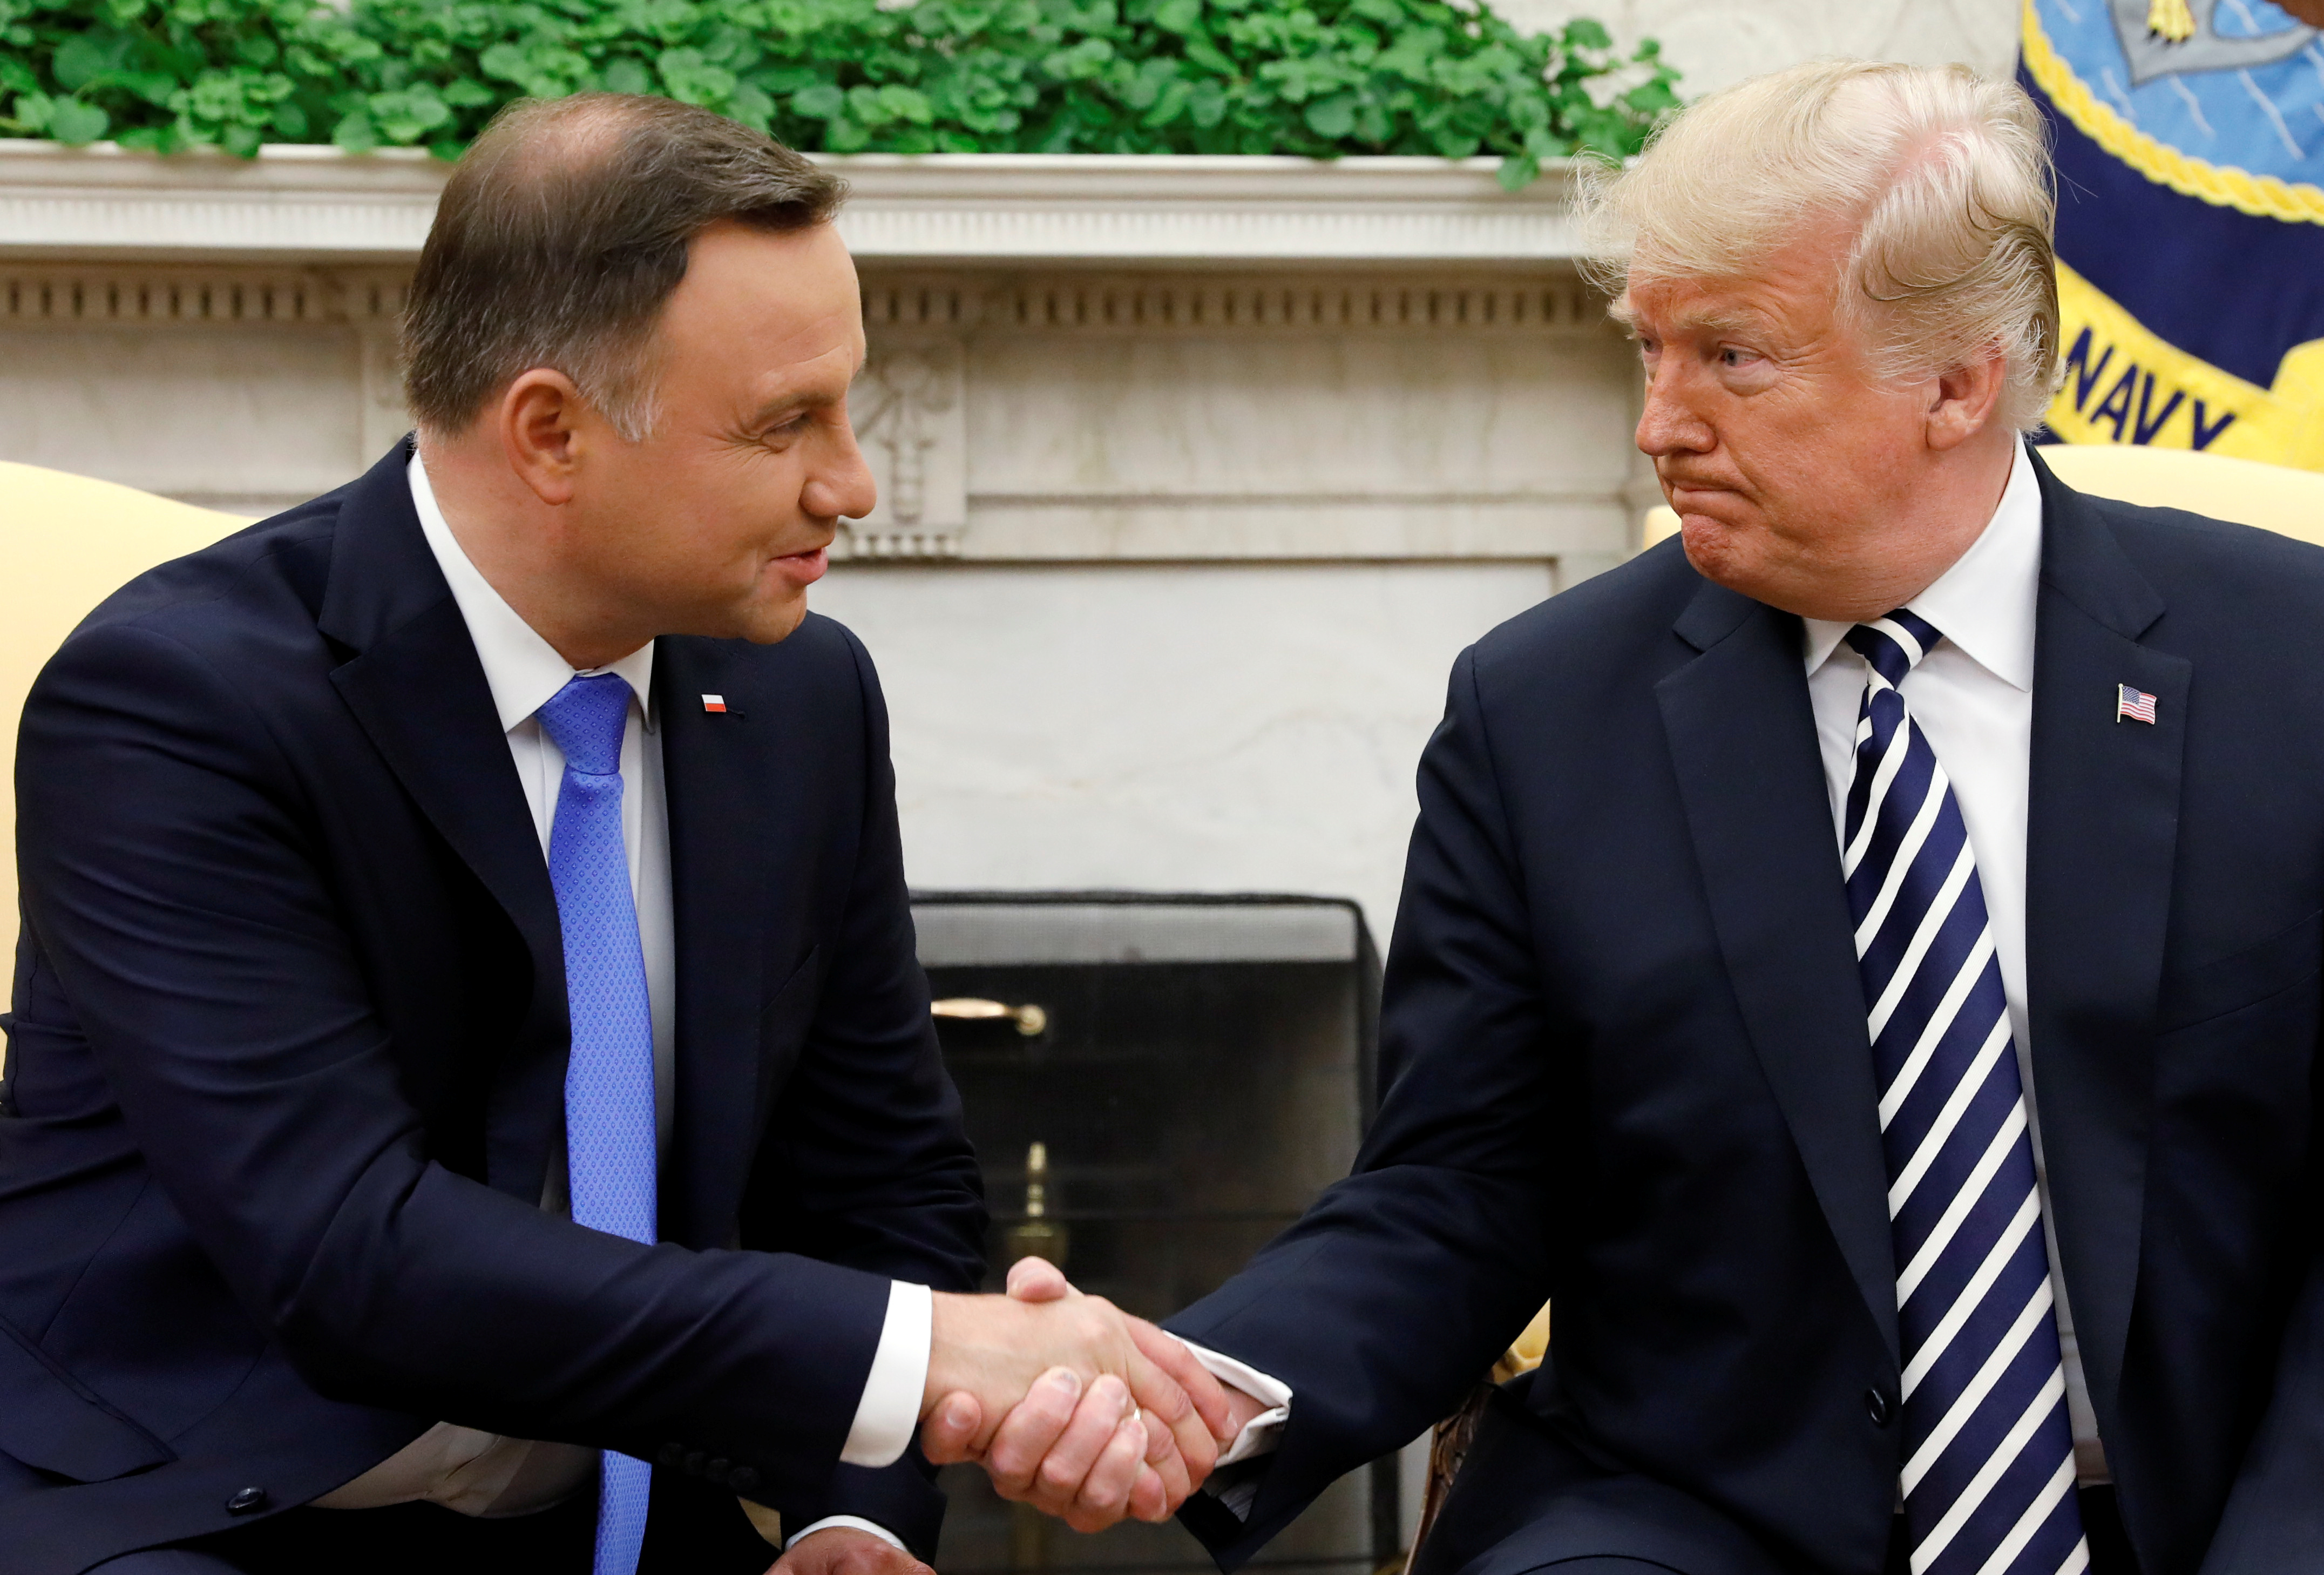 U.S. President Donald Trump greets Poland's President Andrzej Duda in the Oval Office of the White House in Washington, U.S., September 18, 2018. REUTERS/Kevin Lamarque